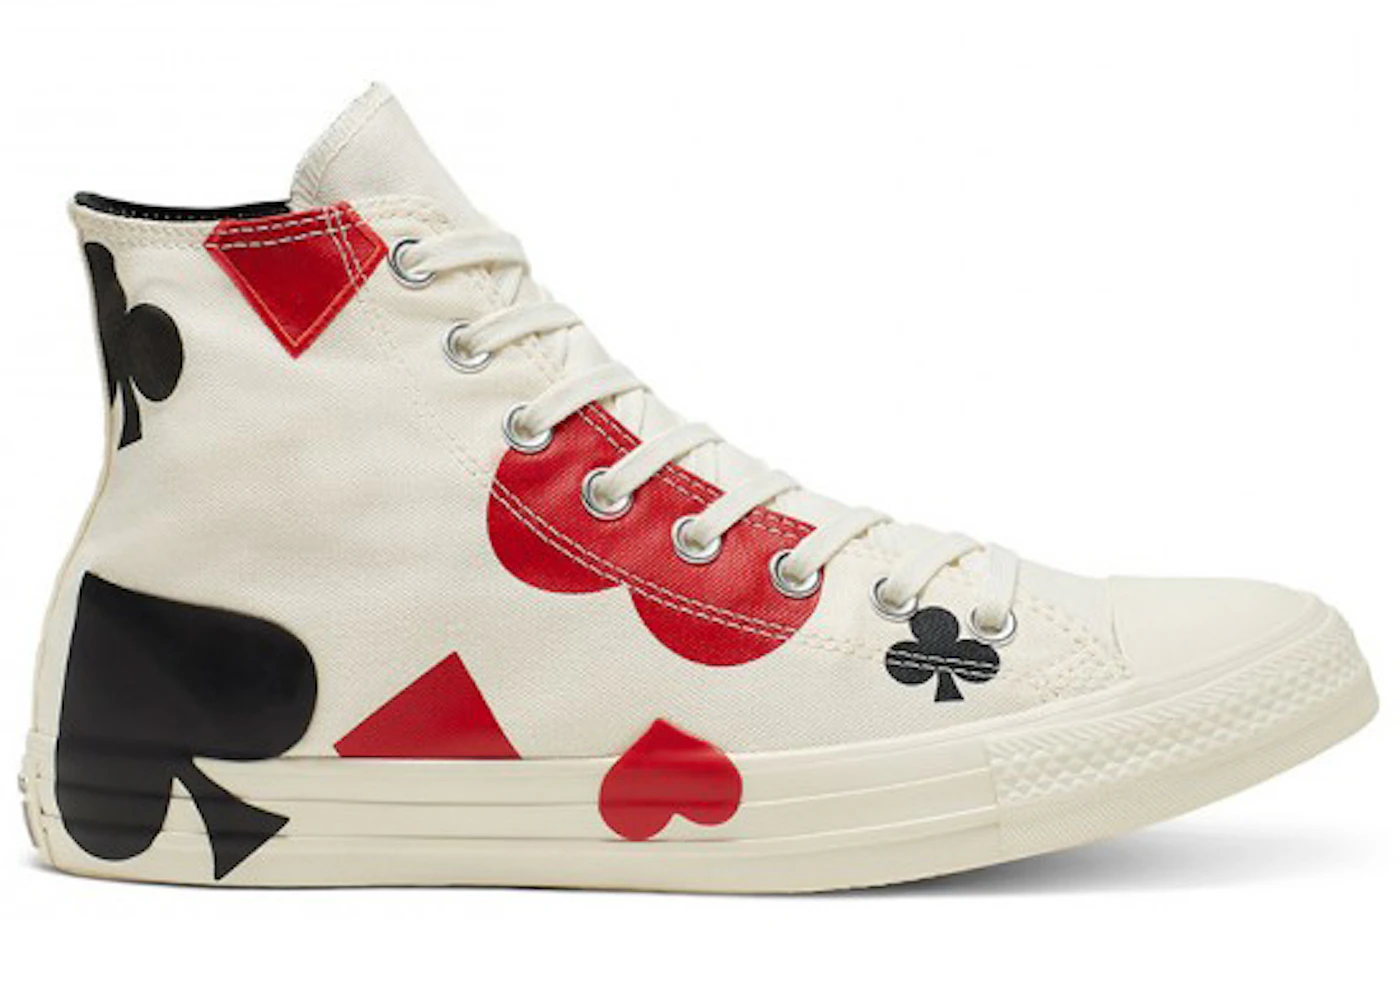 Intimate Motley Communication network Converse Chuck Taylor All-Star Hi Queen of Hearts - 165669C